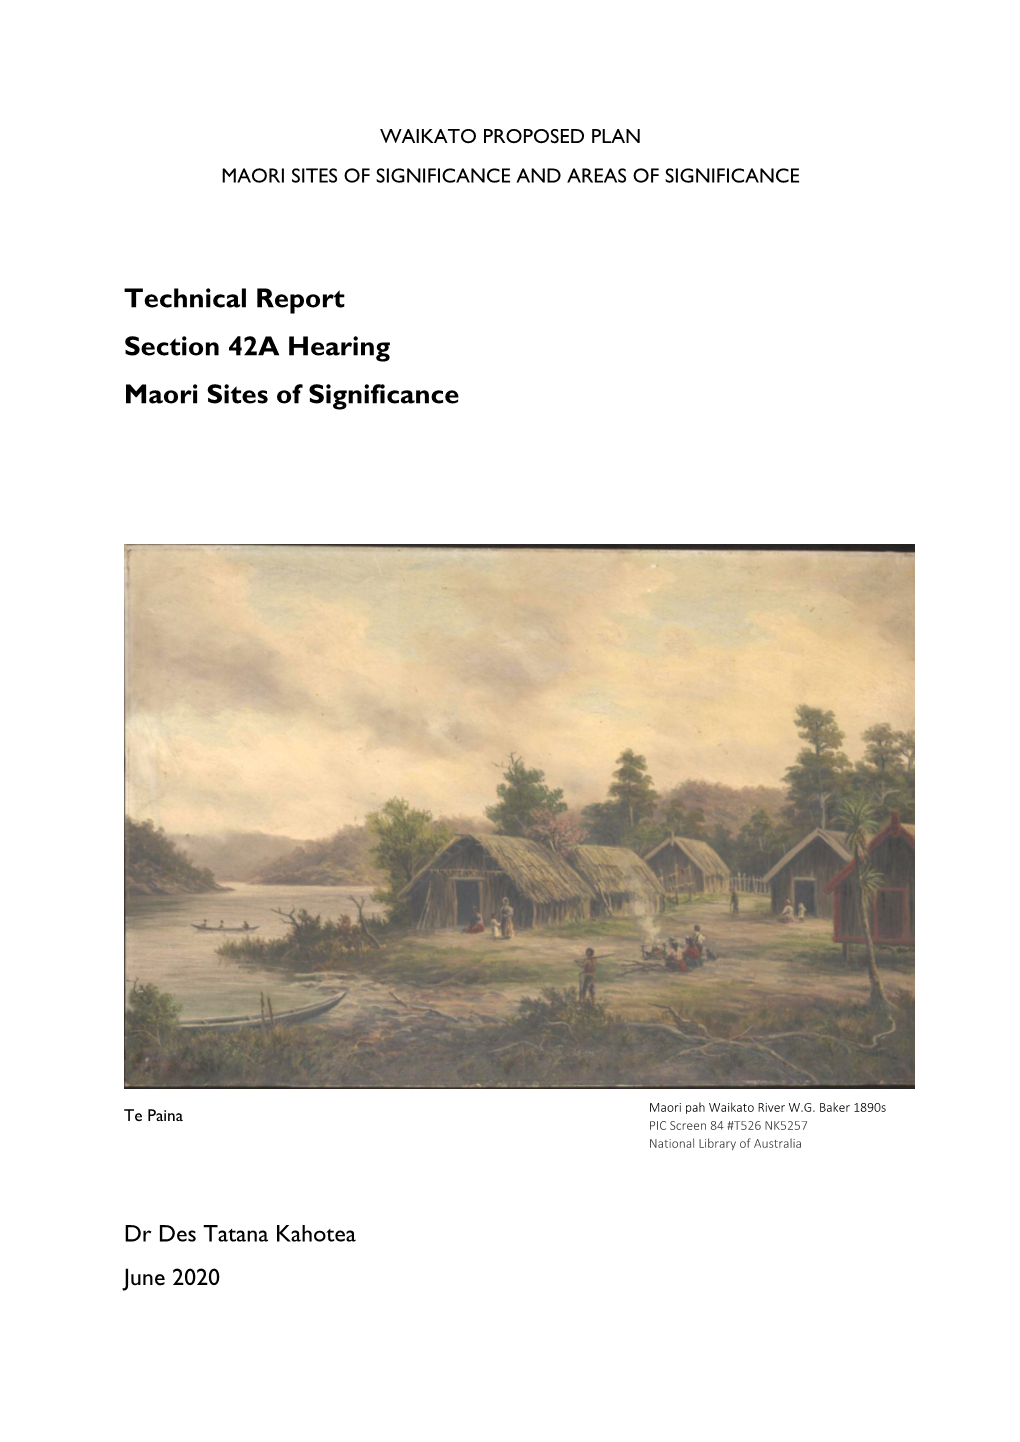 Technical Report Section 42A Hearing Maori Sites of Significance